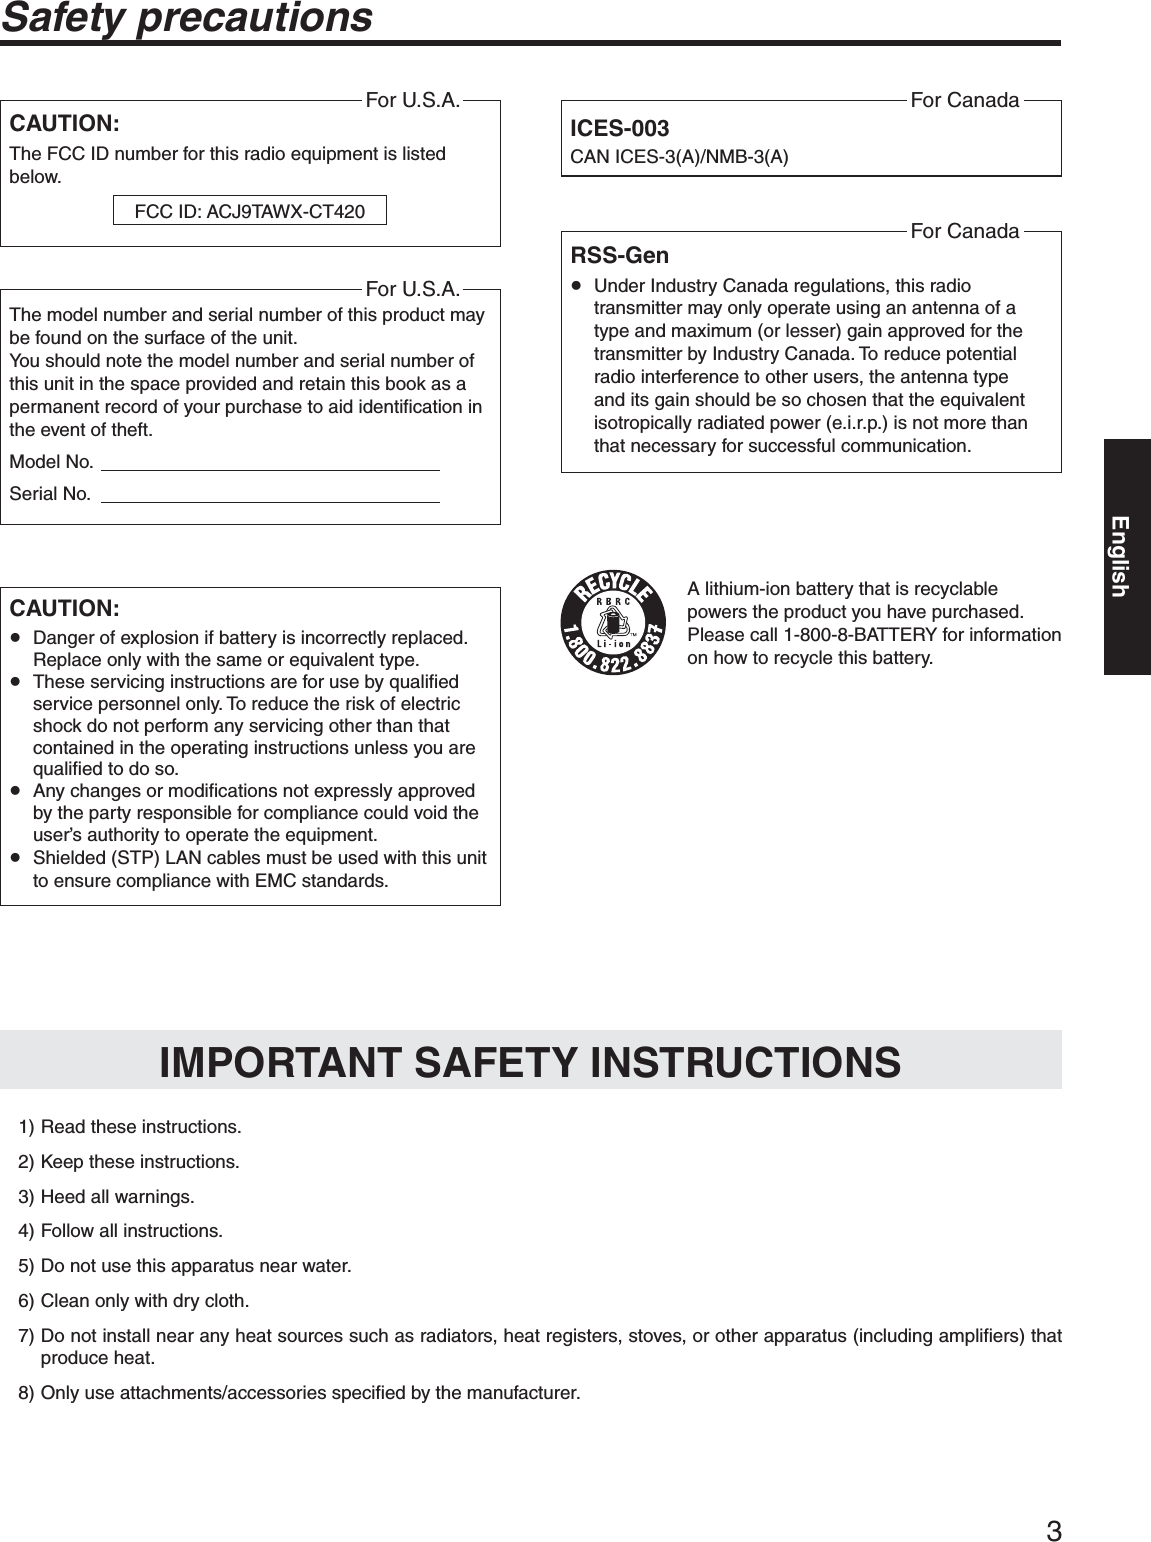 3Safety precautionsCAUTION:The FCC ID number for this radio equipment is listed below.For U.S.A.FCC ID: ACJ9TAWX-CT420CAUTION:p Danger of explosion if battery is incorrectly replaced. Replace only with the same or equivalent type.p These servicing instructions are for use by qualified service personnel only. To reduce the risk of electric shock do not perform any servicing other than that contained in the operating instructions unless you are qualified to do so.p Any changes or modifications not expressly approved by the party responsible for compliance could void the user’s authority to operate the equipment.p Shielded (STP) LAN cables must be used with this unit to ensure compliance with EMC standards.ICES-003CAN ICES-3(A)/NMB-3(A)For CanadaA lithium-ion battery that is recyclable powers the product you have purchased. Please call 1-800-8-BATTERY for information on how to recycle this battery.  1) Read these instructions.  2) Keep these instructions.  3) Heed all warnings.  4) Follow all instructions.  5) Do not use this apparatus near water.  6) Clean only with dry cloth. 7)  Do not install near any heat sources such as radiators, heat registers, stoves, or other apparatus (including amplifiers) that produce heat. 8)  Only use attachments/accessories specified by the manufacturer.IMPORTANT SAFETY INSTRUCTIONSRSS-Genp Under Industry Canada regulations, this radio transmitter may only operate using an antenna of a type and maximum (or lesser) gain approved for the transmitter by Industry Canada. To reduce potential radio interference to other users, the antenna type and its gain should be so chosen that the equivalent isotropically radiated power (e.i.r.p.) is not more than that necessary for successful communication.For CanadaThe model number and serial number of this product may be found on the surface of the unit.You should note the model number and serial number of this unit in the space provided and retain this book as a permanent record of your purchase to aid identification in the event of theft.Model No.                                                                   Serial No.                                                                   For U.S.A.English